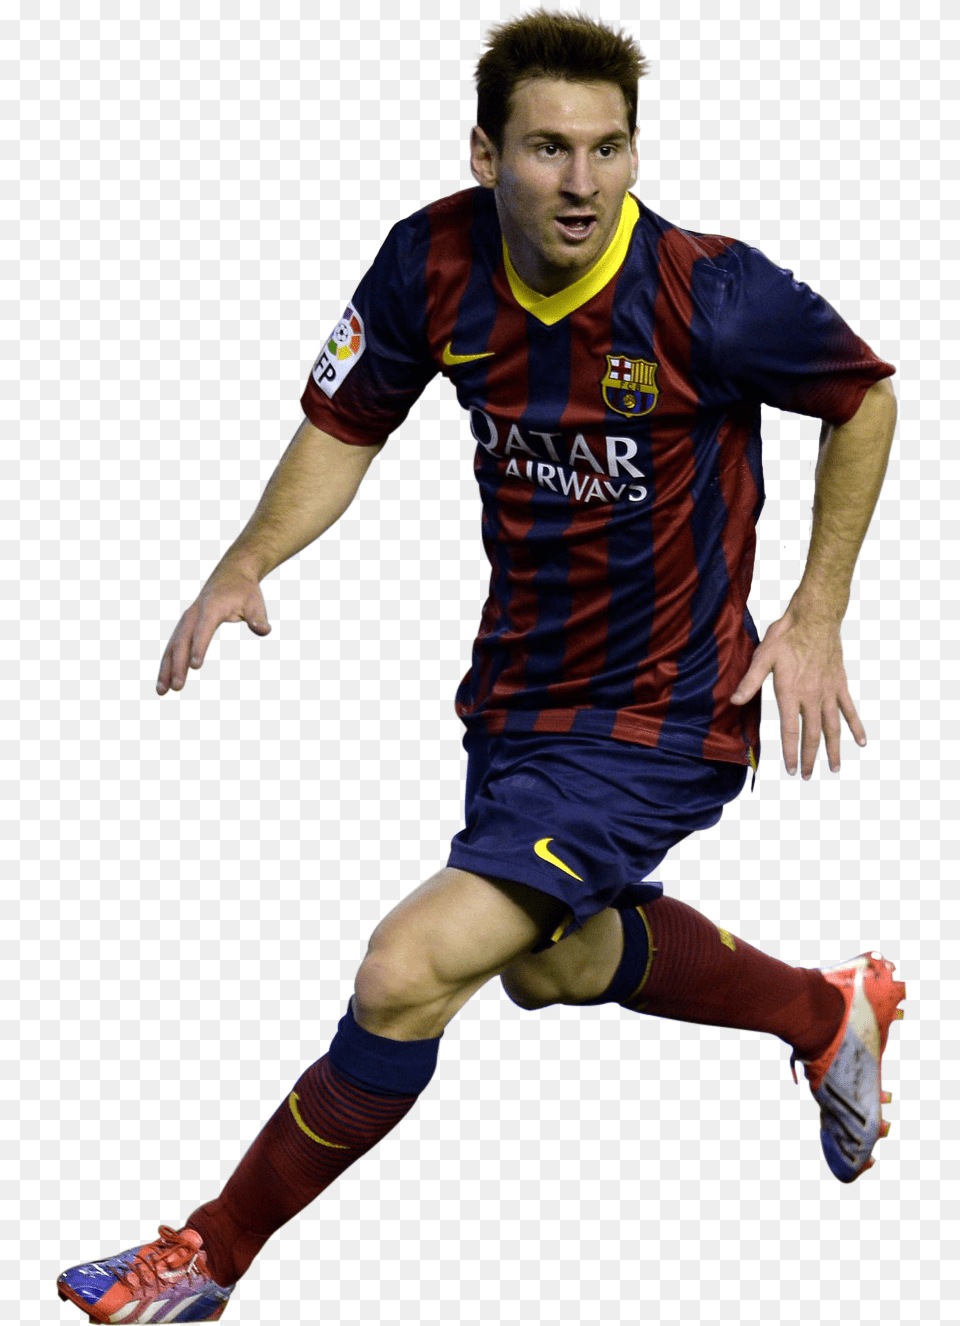 Lionel Messi Background Barca Jpg Messi With Background, Clothing, Shoe, Footwear, Teen Free Png